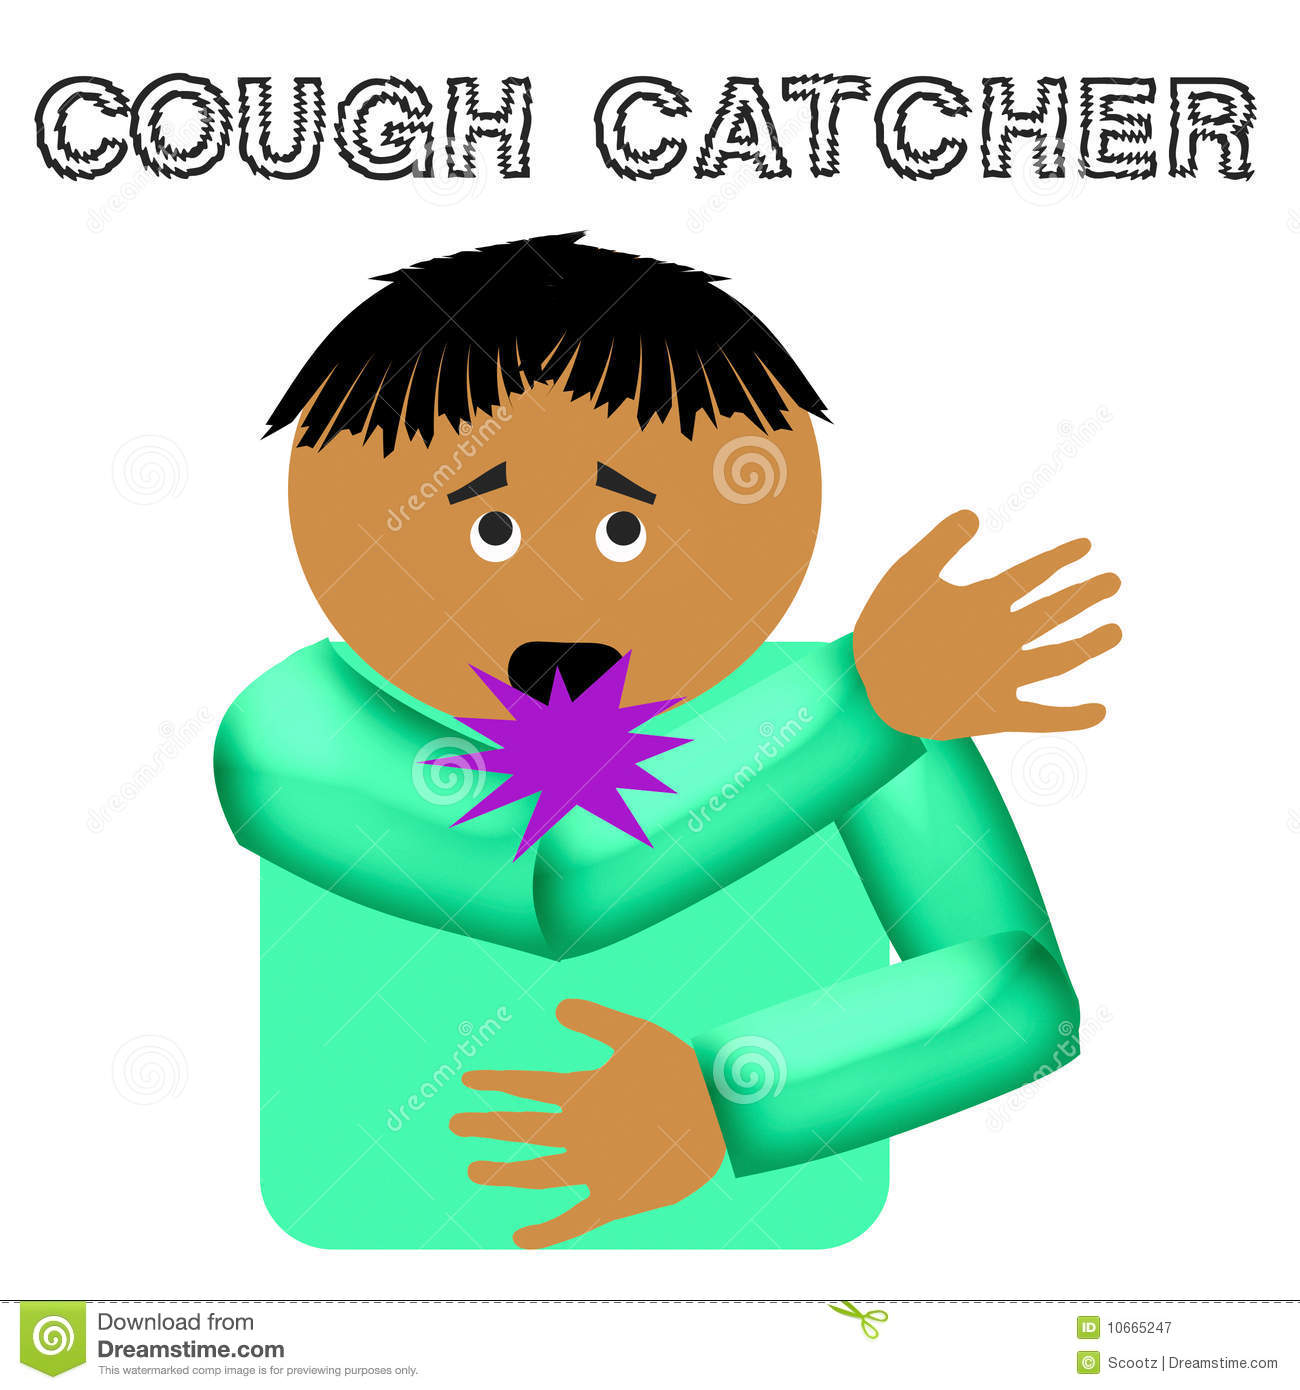 Cough Catcher Illustration Royalty Free Stock Photography   Image